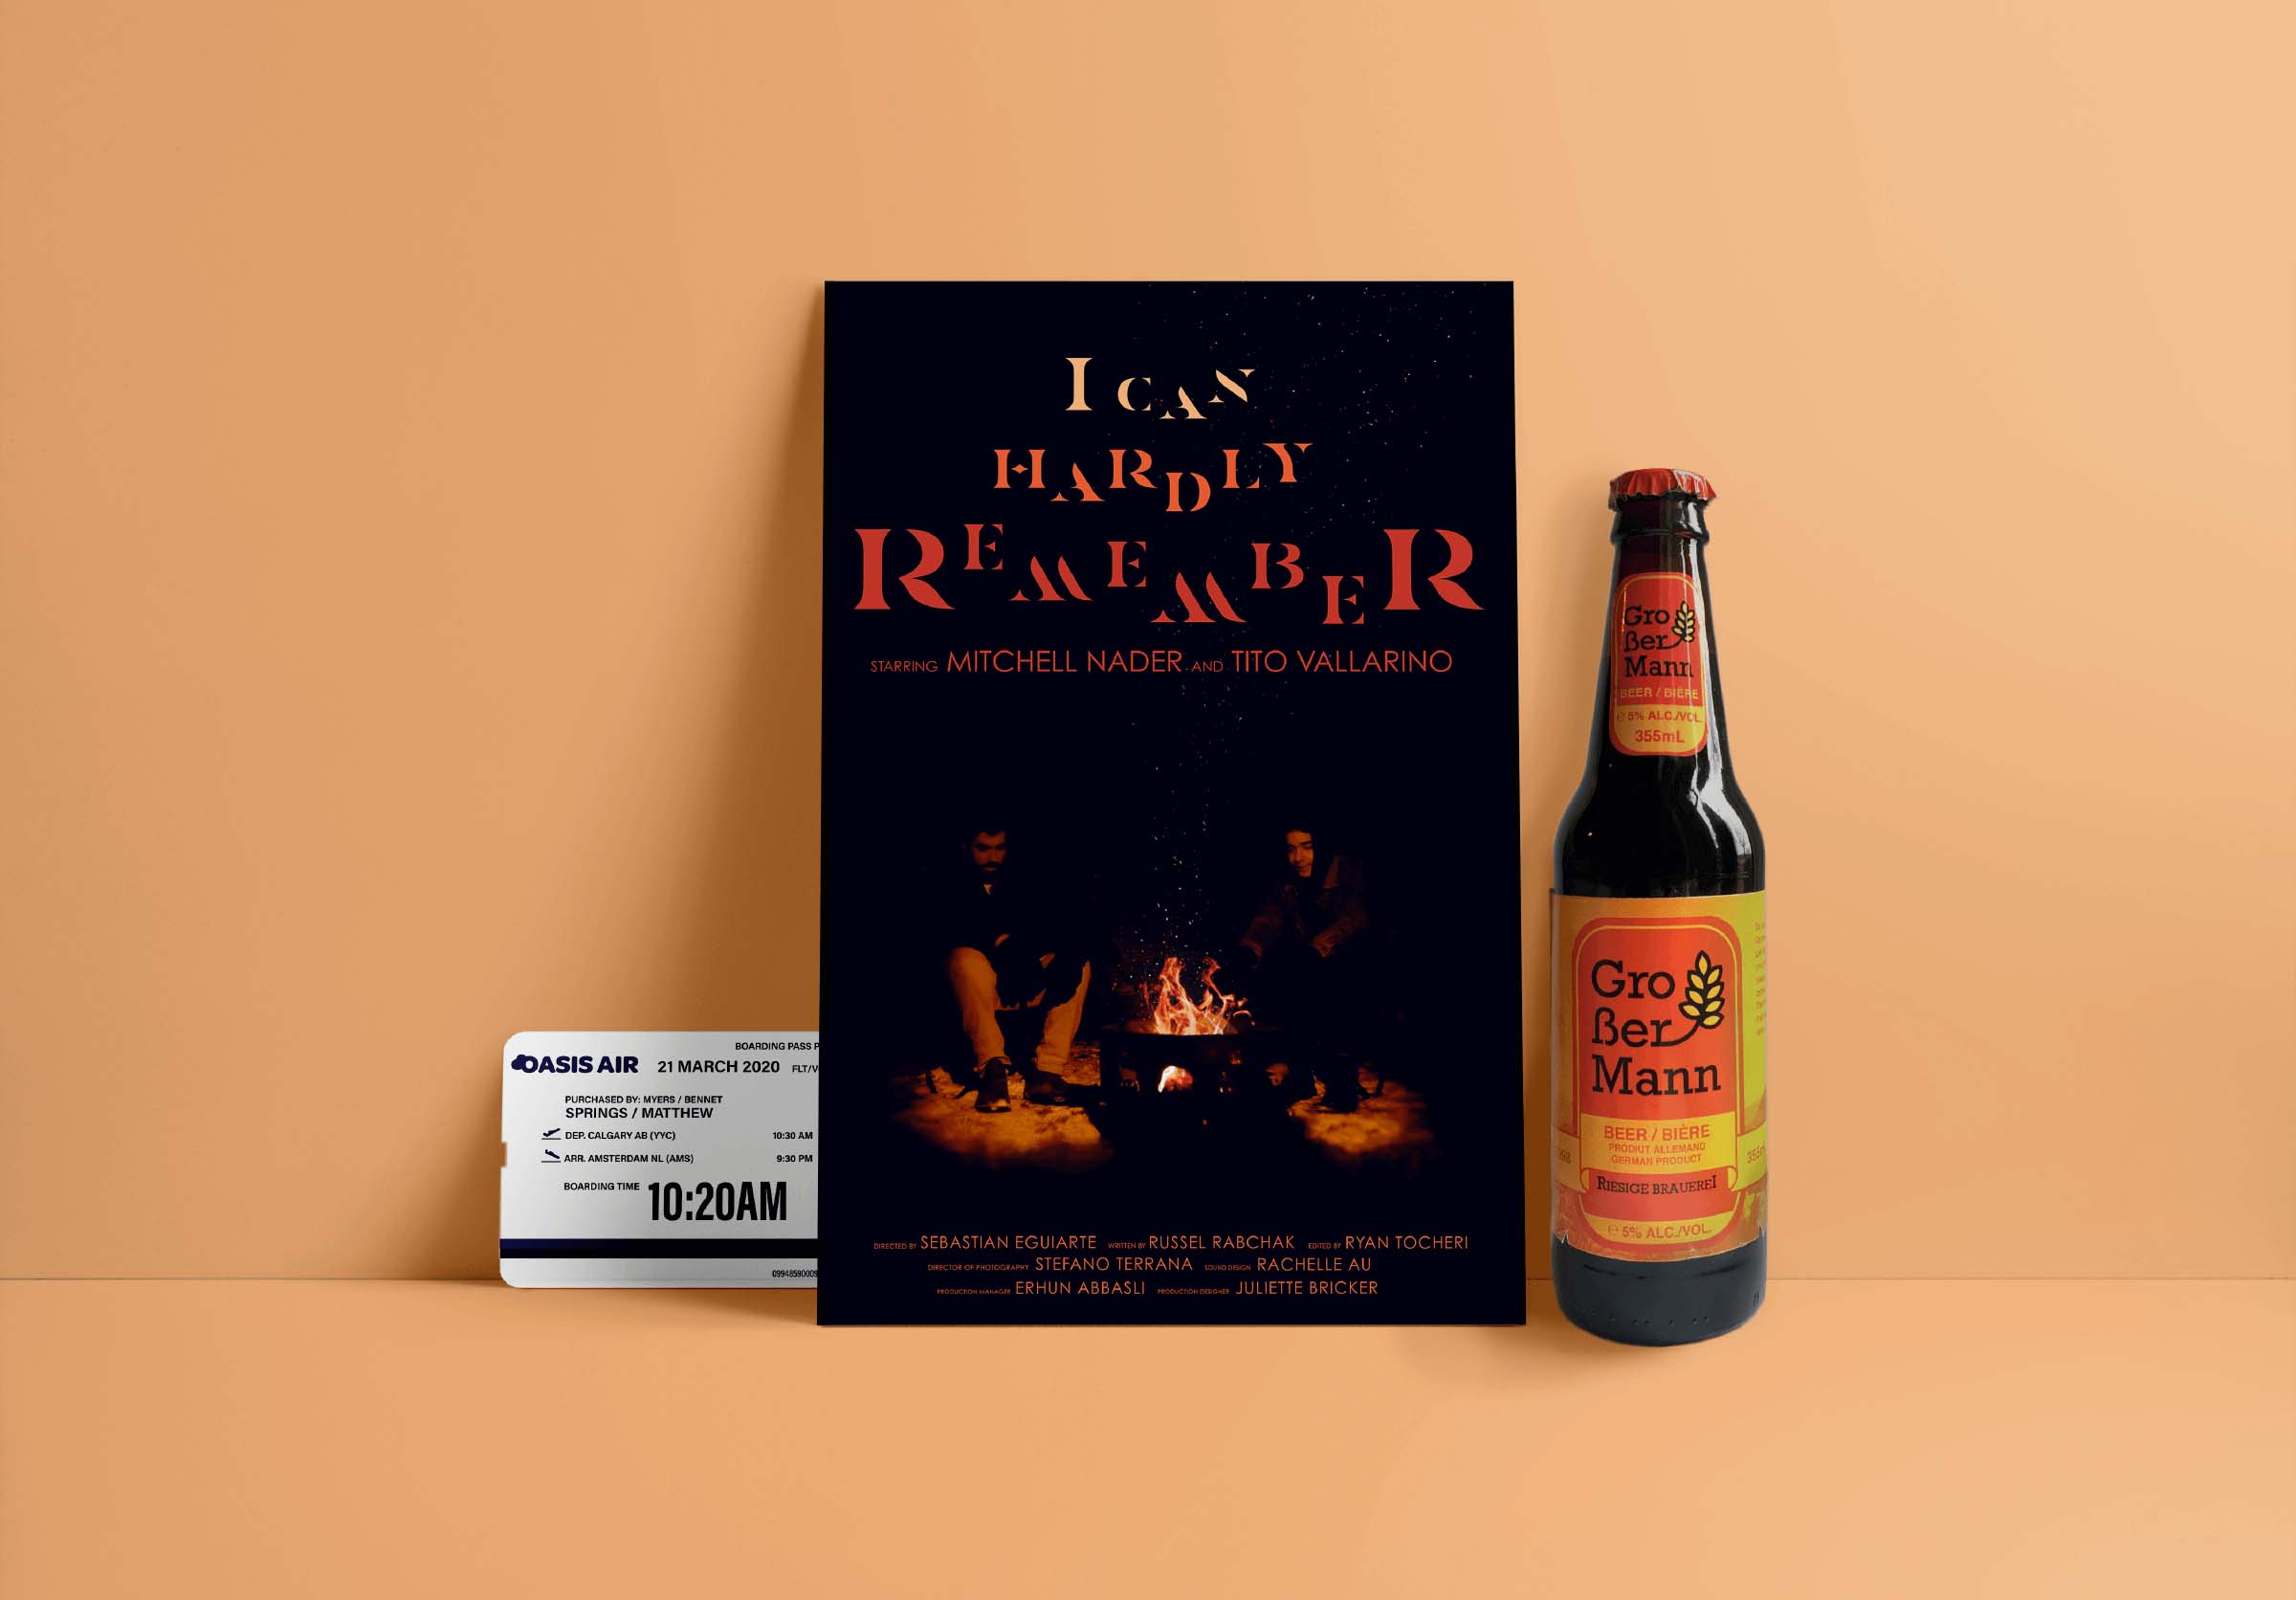 A dark movie poster of two guys sitting around a campfire and a plane ticket and beer bottle beside the poster